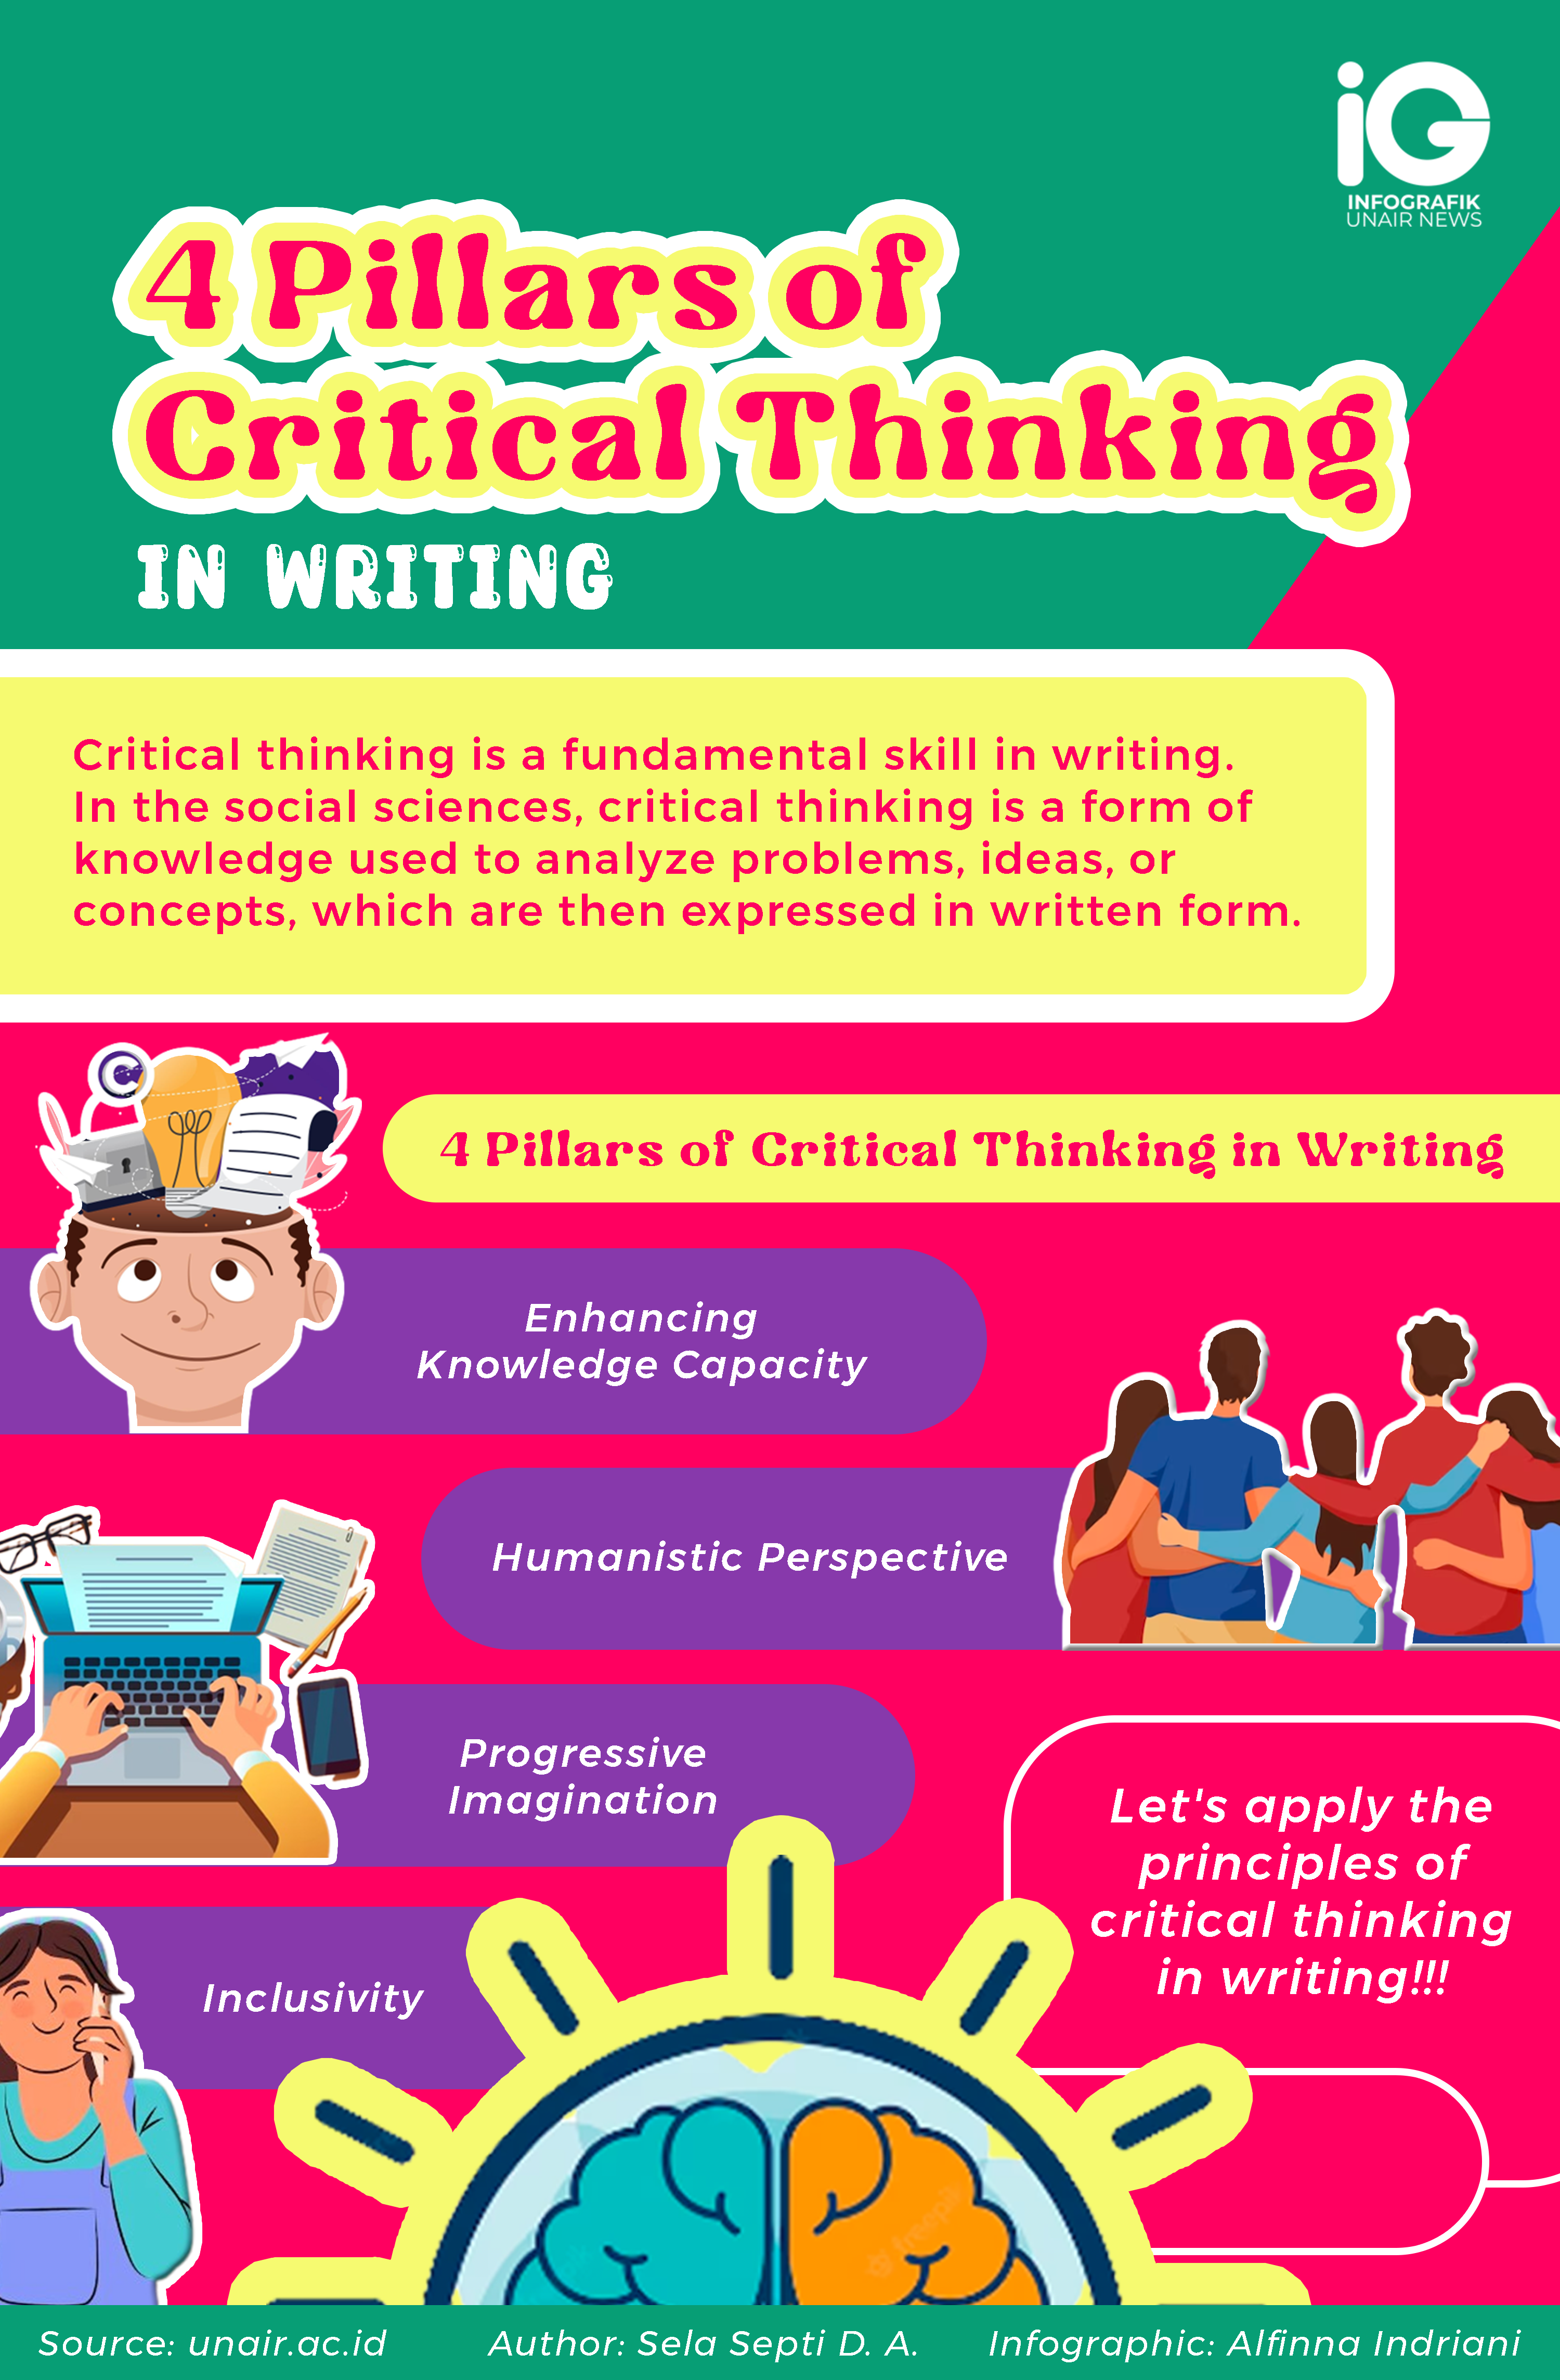 what are the 4 pillars of critical thinking